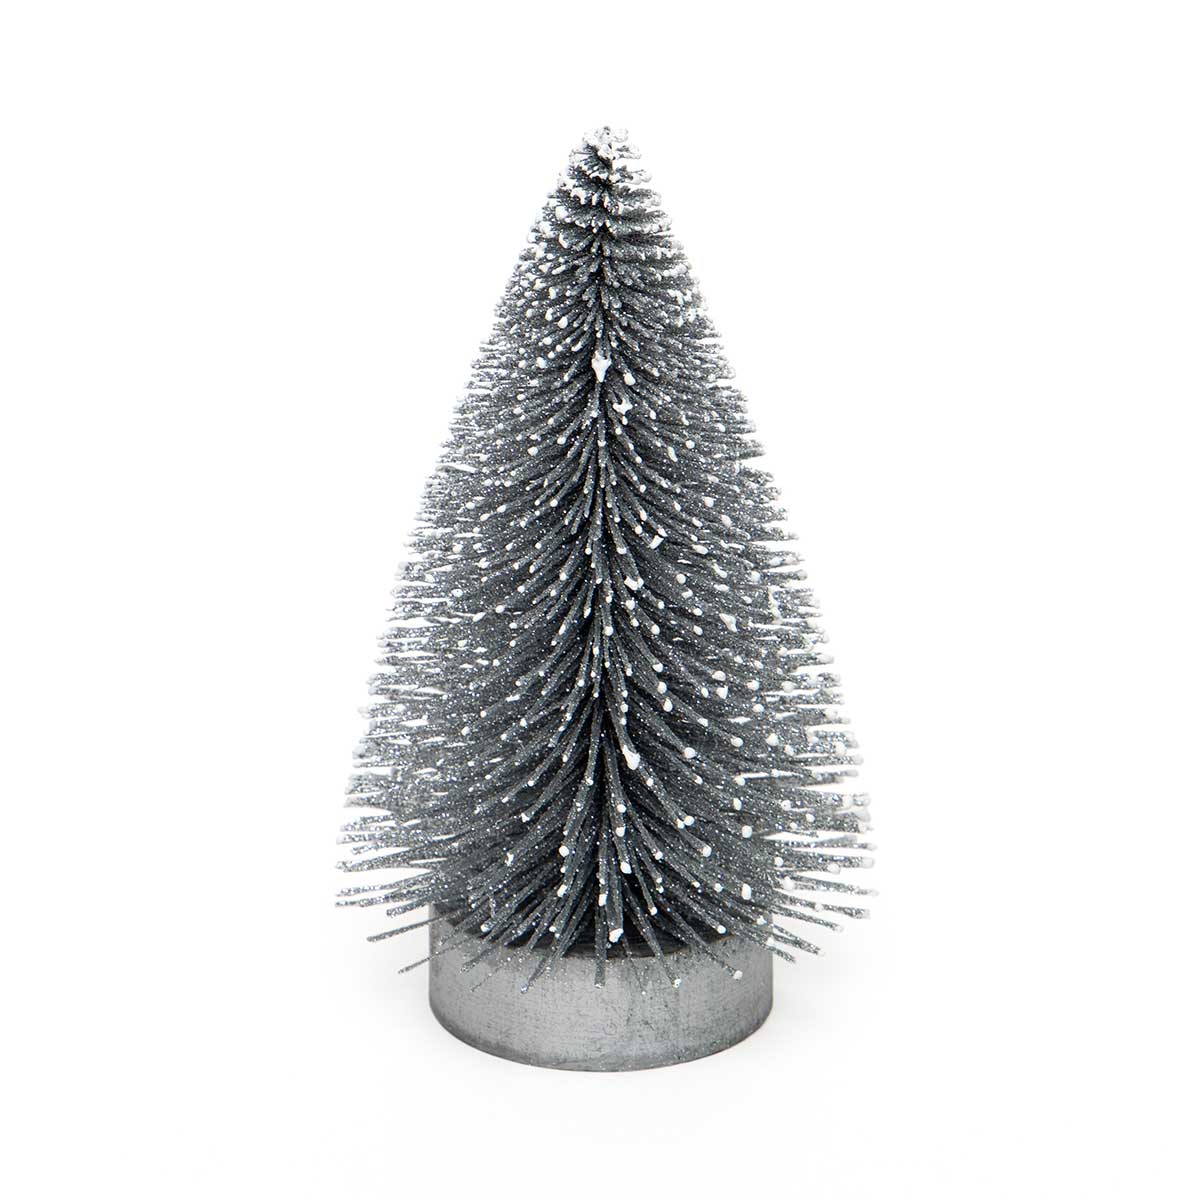 !BRISTLE TREE SILVER WITH SNOWY TIPS, GLITTER AND WOOD BASE